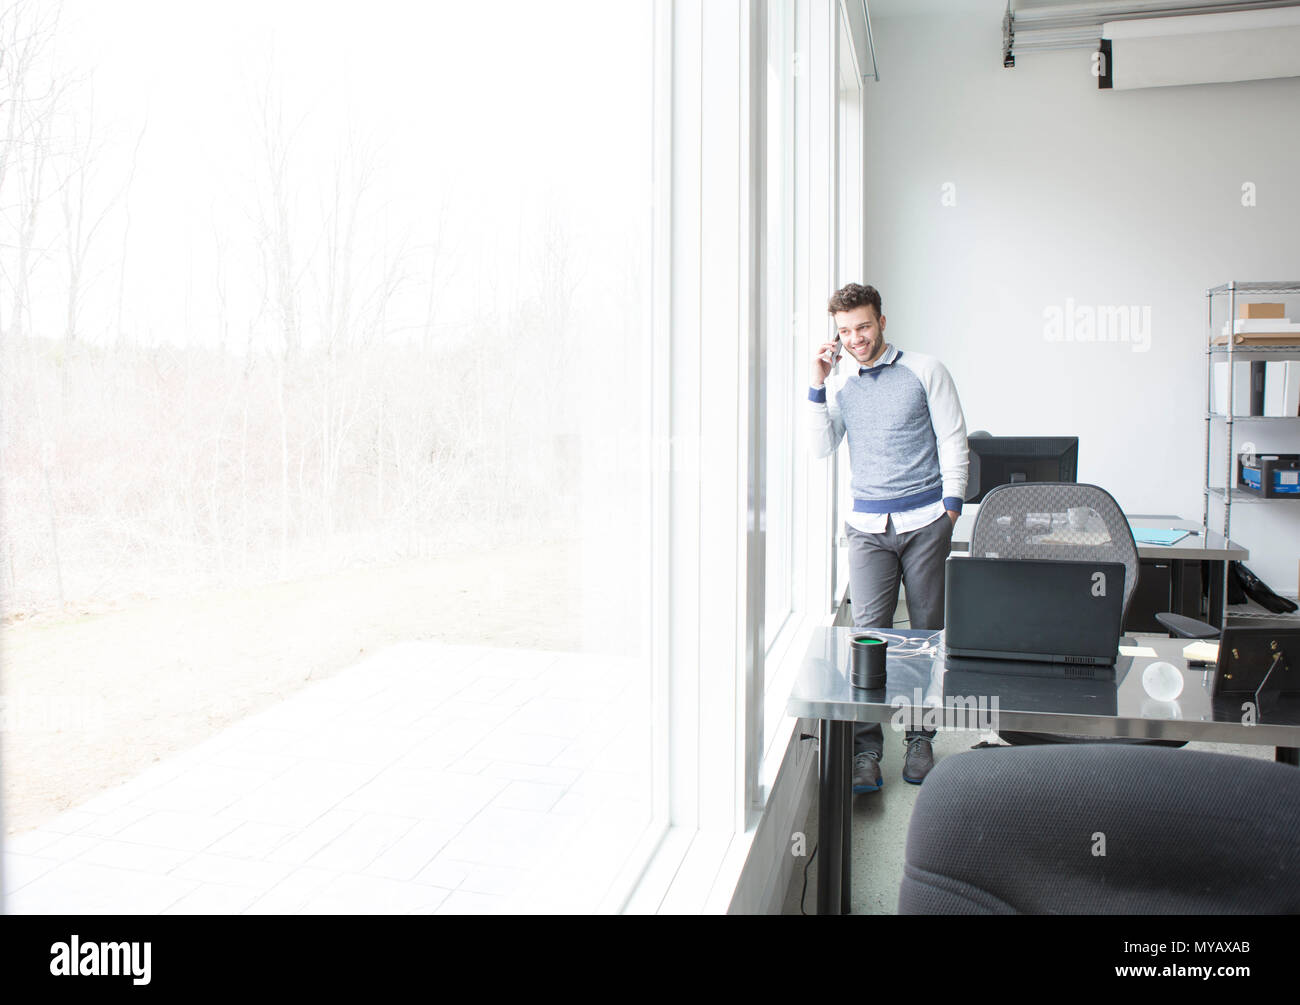 A young businessman looks out an office window while chatting on a cellphone. Stock Photo